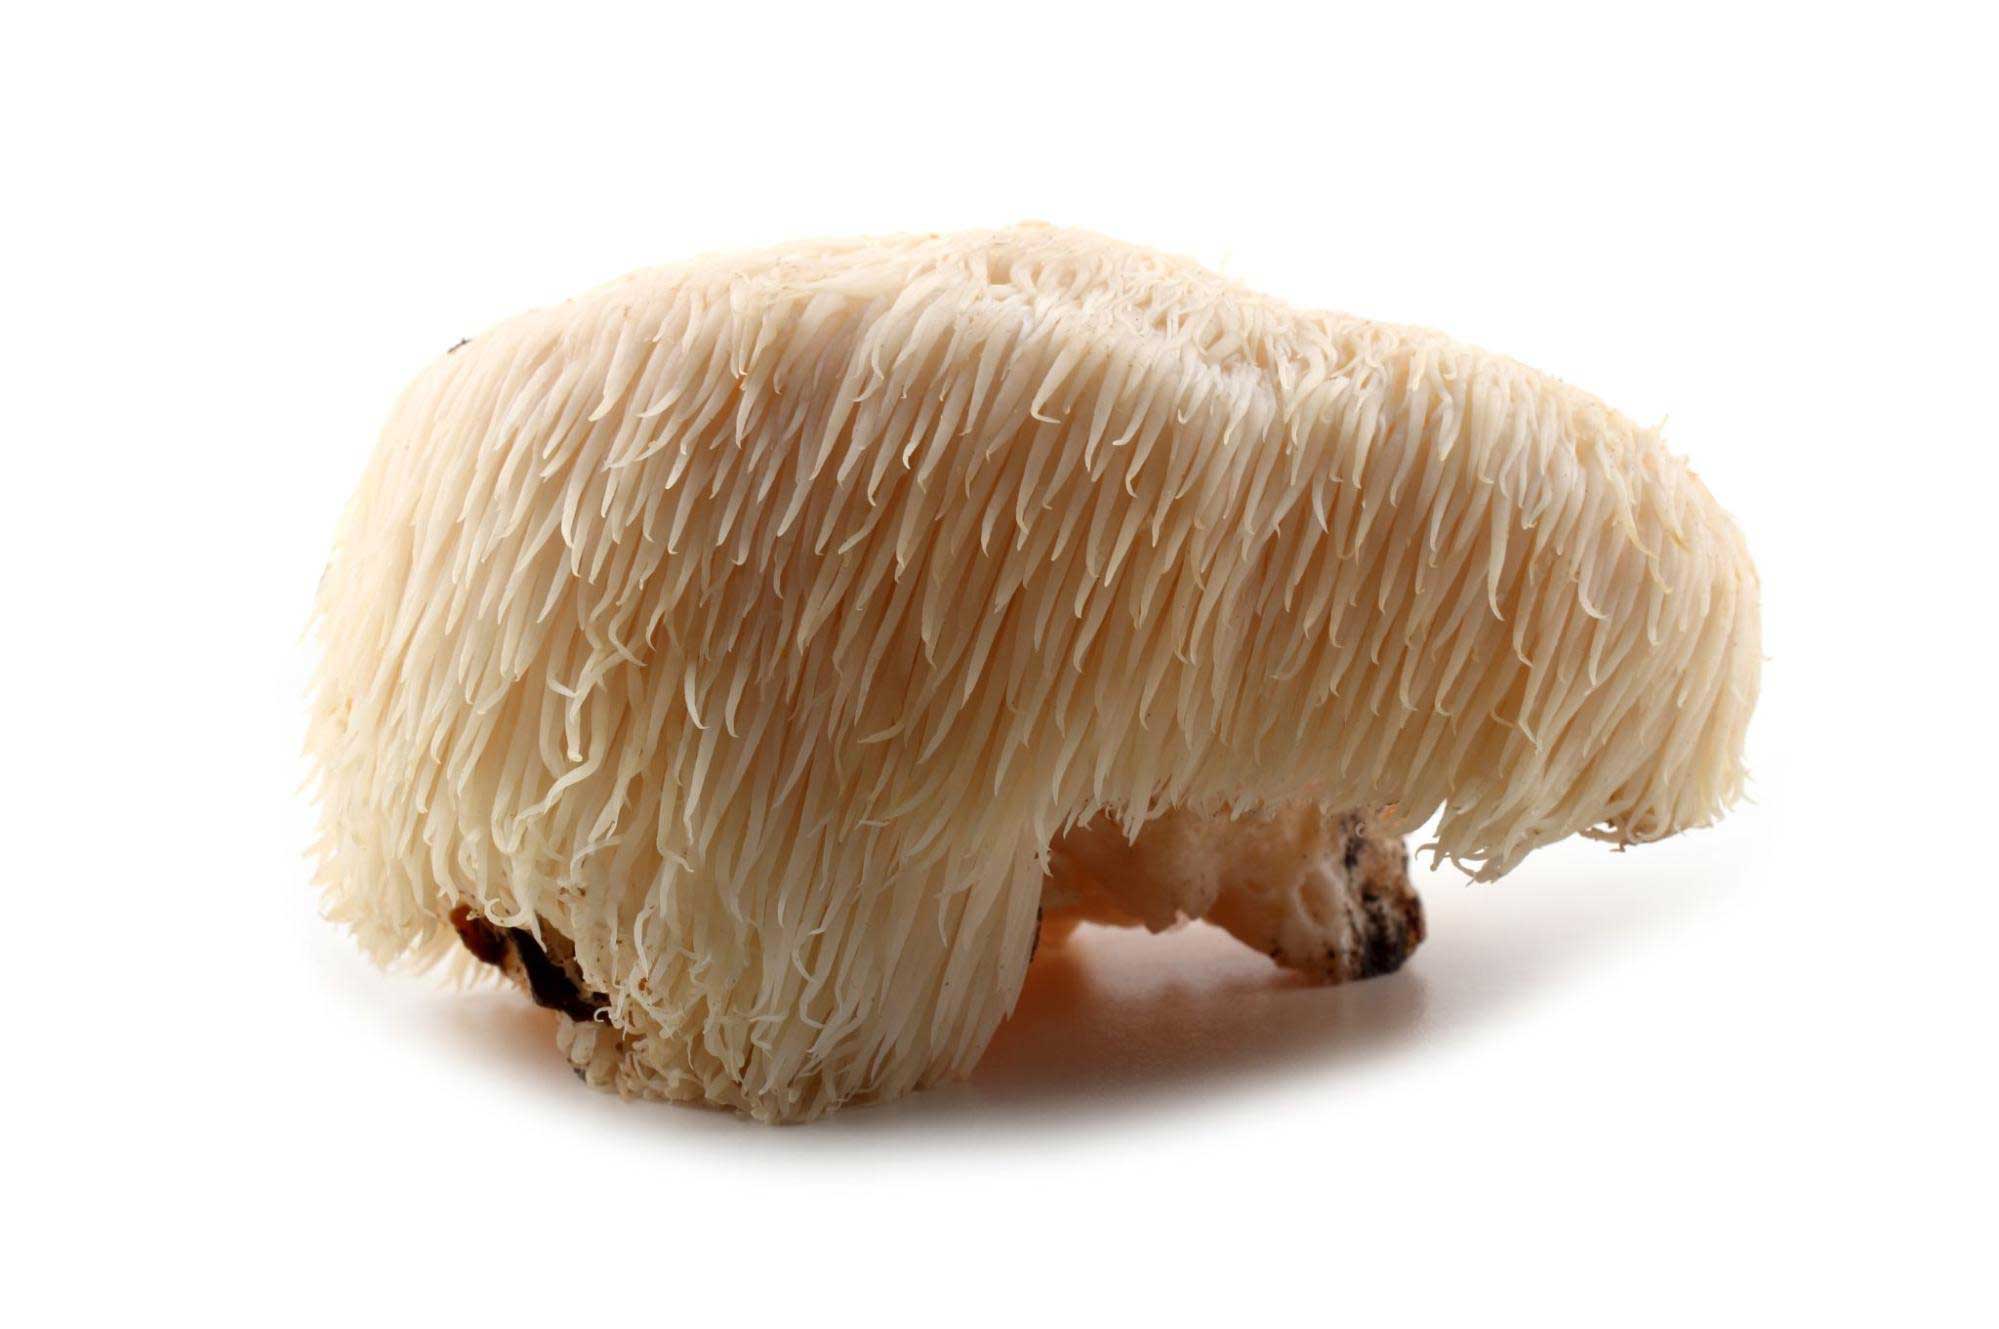 In the lion’s mane mushroom, compounds found in the mycelium and the fruiting body have been reported to stimulate the synthesis of Nerve Growth Factor (NGF) and to promote NGF-induced neurite outgrowth